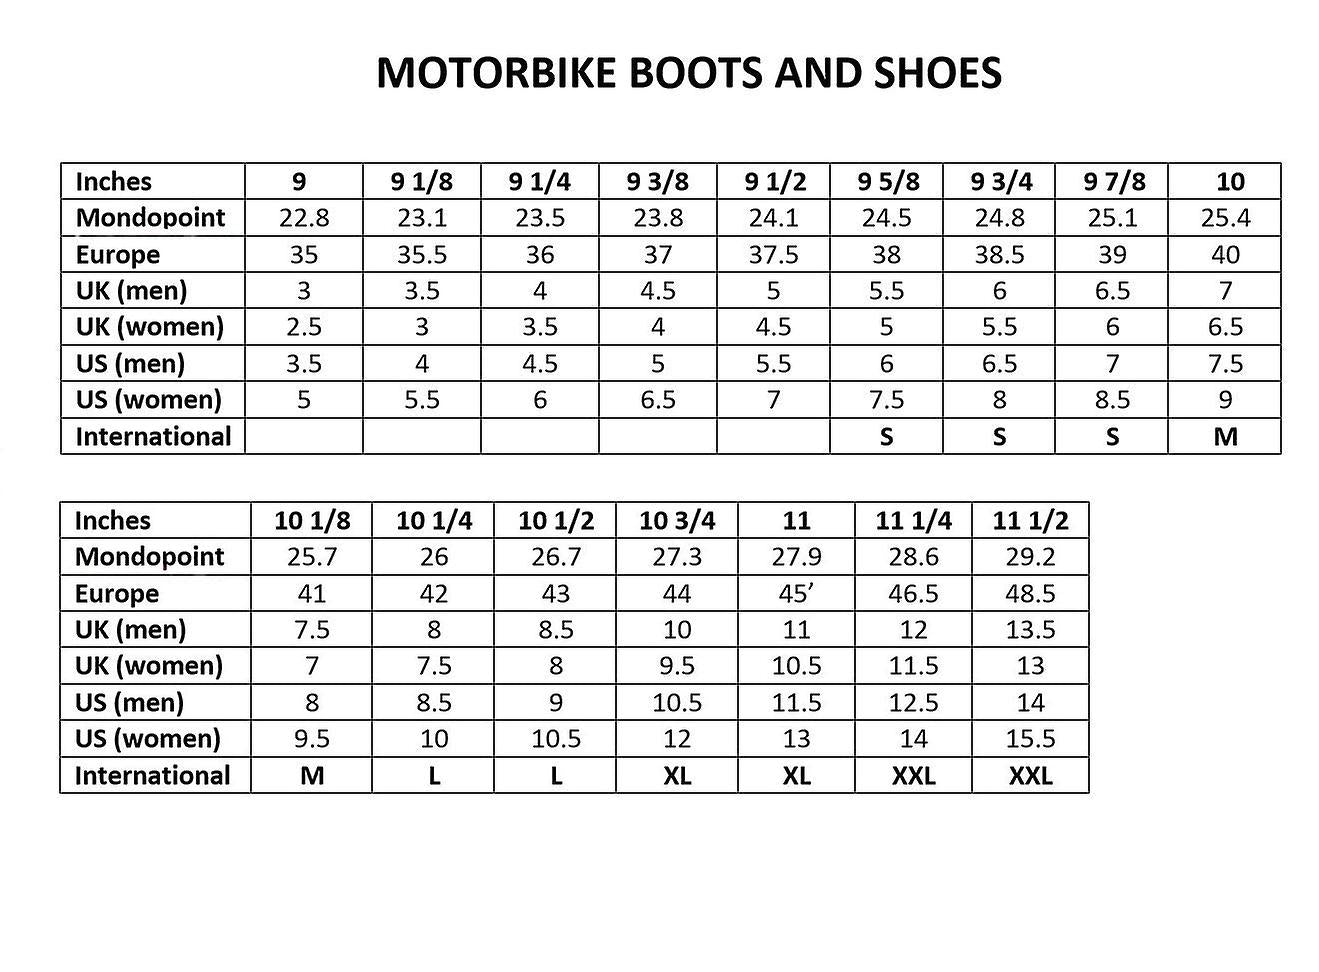 Mens Leather Motorbike Motorcycle Racing Sports Shoes Boots MN-020